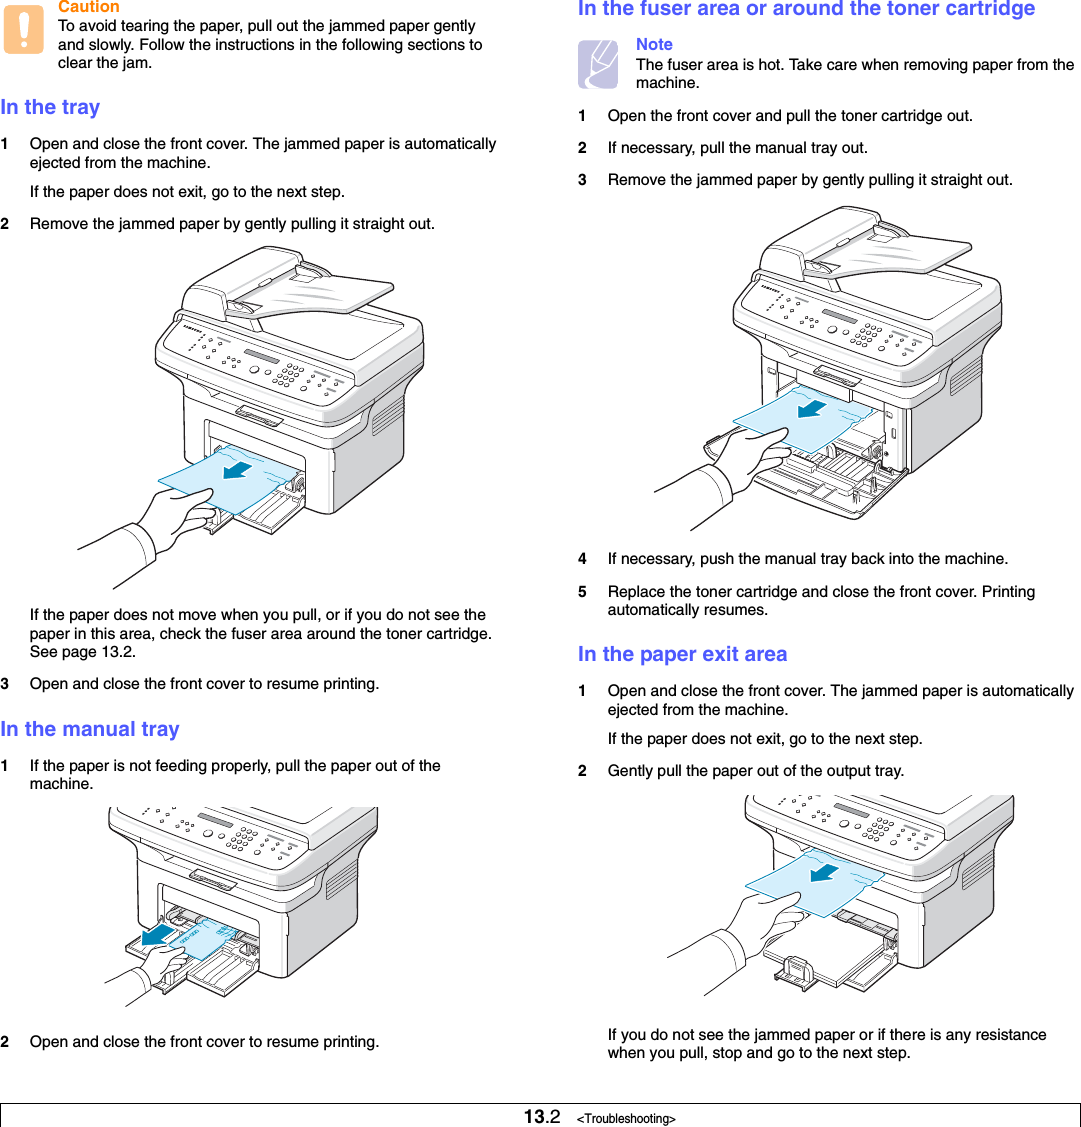 13.2   &lt;Troubleshooting&gt;CautionTo avoid tearing the paper, pull out the jammed paper gently and slowly. Follow the instructions in the following sections to clear the jam. In the tray1Open and close the front cover. The jammed paper is automatically ejected from the machine.If the paper does not exit, go to the next step.2Remove the jammed paper by gently pulling it straight out.If the paper does not move when you pull, or if you do not see the paper in this area, check the fuser area around the toner cartridge. See page 13.2. 3Open and close the front cover to resume printing.In the manual tray1If the paper is not feeding properly, pull the paper out of the machine.2Open and close the front cover to resume printing.In the fuser area or around the toner cartridgeNoteThe fuser area is hot. Take care when removing paper from the machine.1Open the front cover and pull the toner cartridge out.2If necessary, pull the manual tray out.3Remove the jammed paper by gently pulling it straight out.4If necessary, push the manual tray back into the machine.5Replace the toner cartridge and close the front cover. Printing automatically resumes.In the paper exit area1Open and close the front cover. The jammed paper is automatically ejected from the machine.If the paper does not exit, go to the next step.2Gently pull the paper out of the output tray. If you do not see the jammed paper or if there is any resistance when you pull, stop and go to the next step.